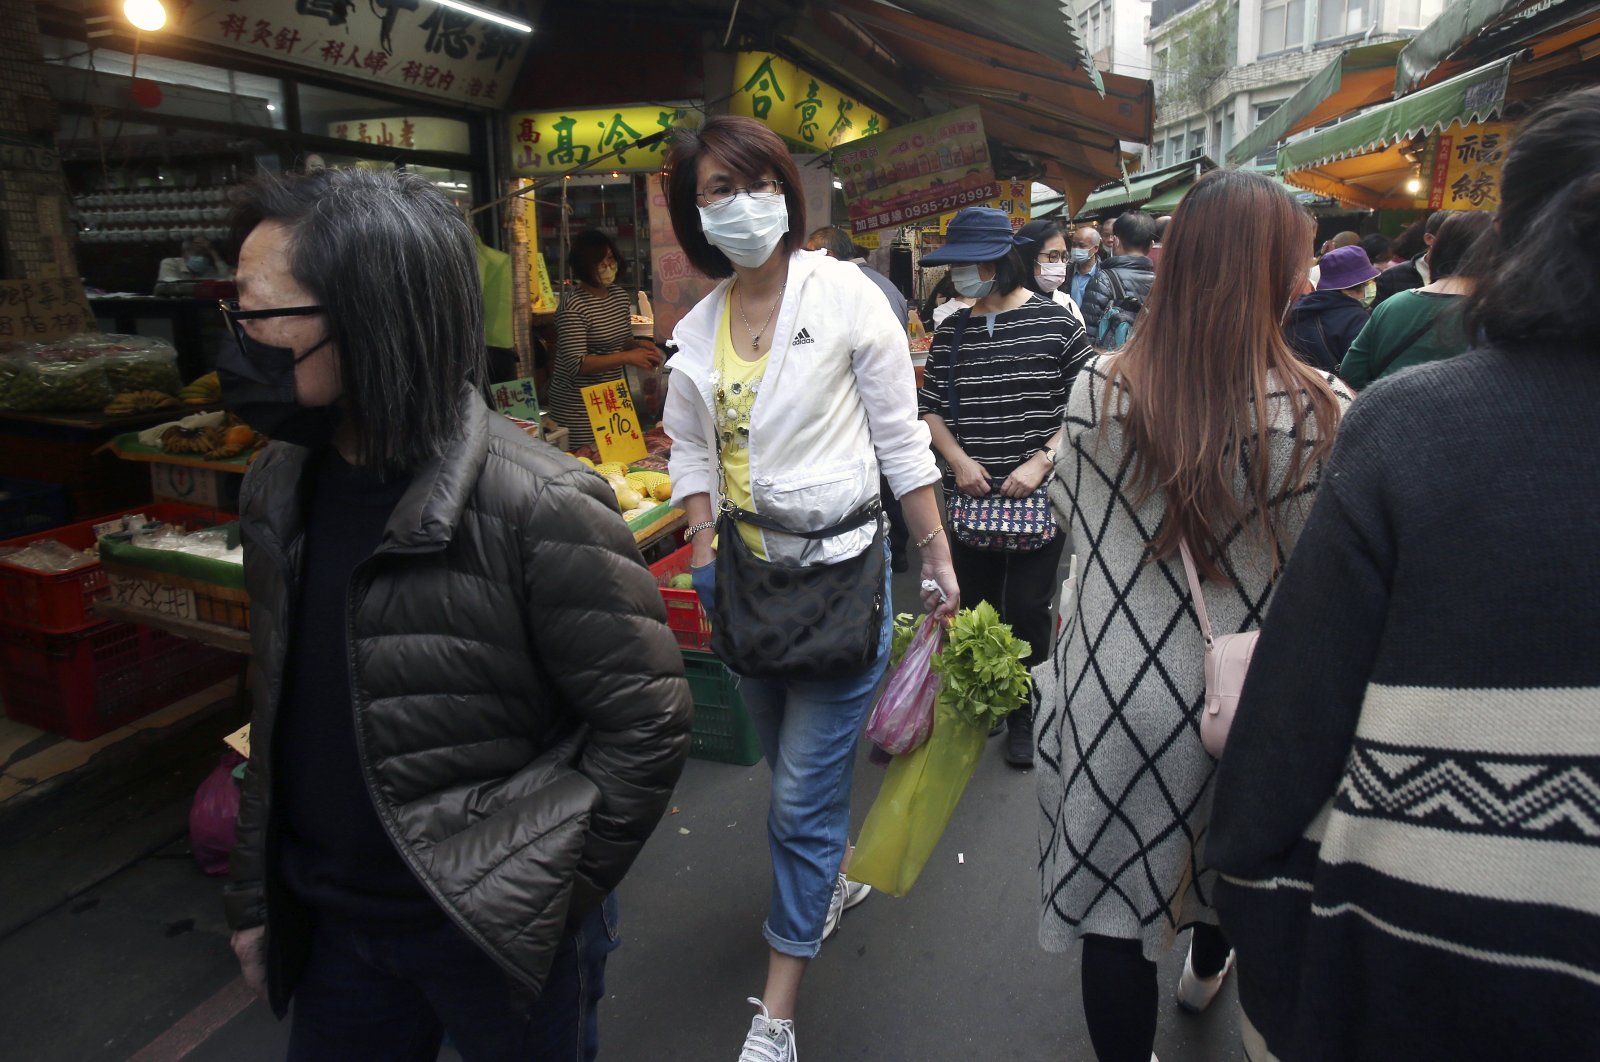 People wear face masks to help curb the spread of the coronavirus as they shop at a market in Taipei, Taiwan, Tuesday, April 14, 2020. (AP Photo)